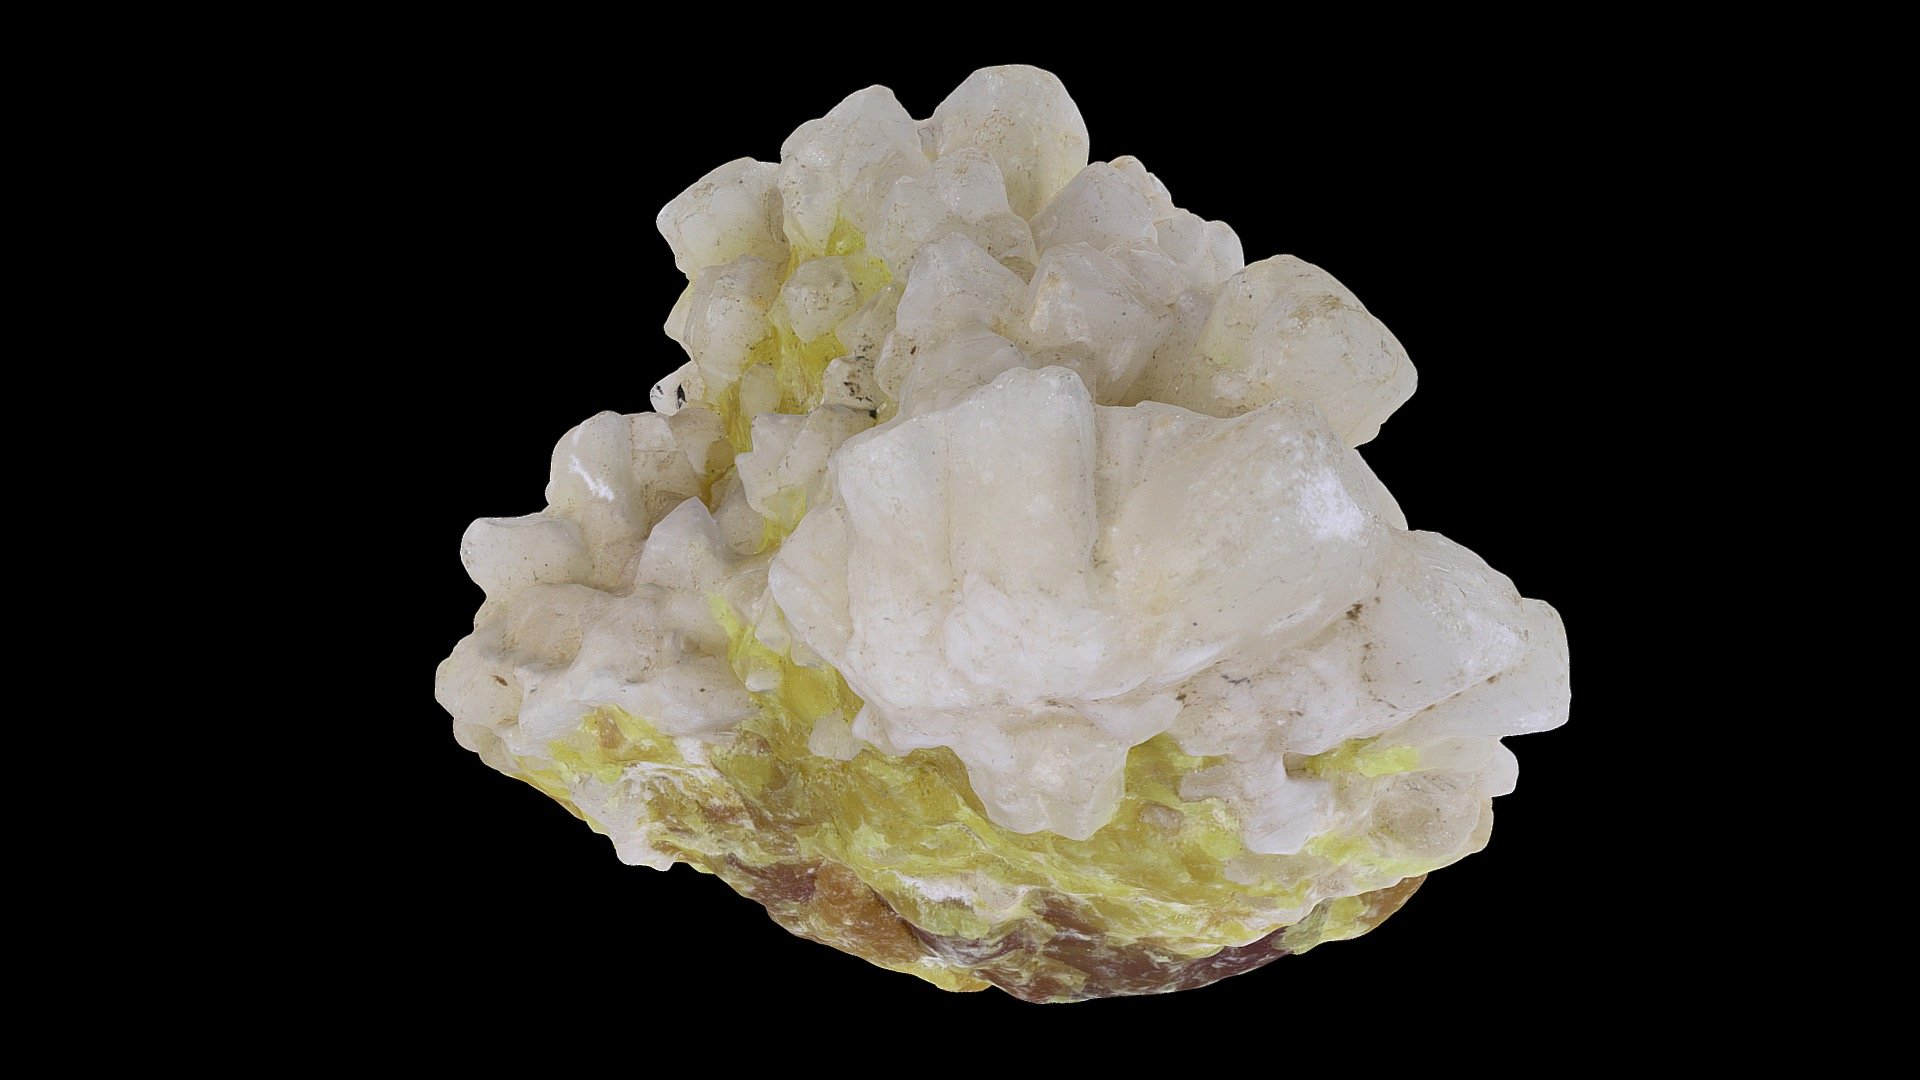 Celestite is strontium sulfate. It is commonly blueish, but this sample (accompanied by yellow native sulfur) is white,  The specimen is 9 cm in longest dimension, - Celestite with sulfur, Lampasas TX, #844, 6-11 - Download Free 3D model by rocksandminerals 3d model